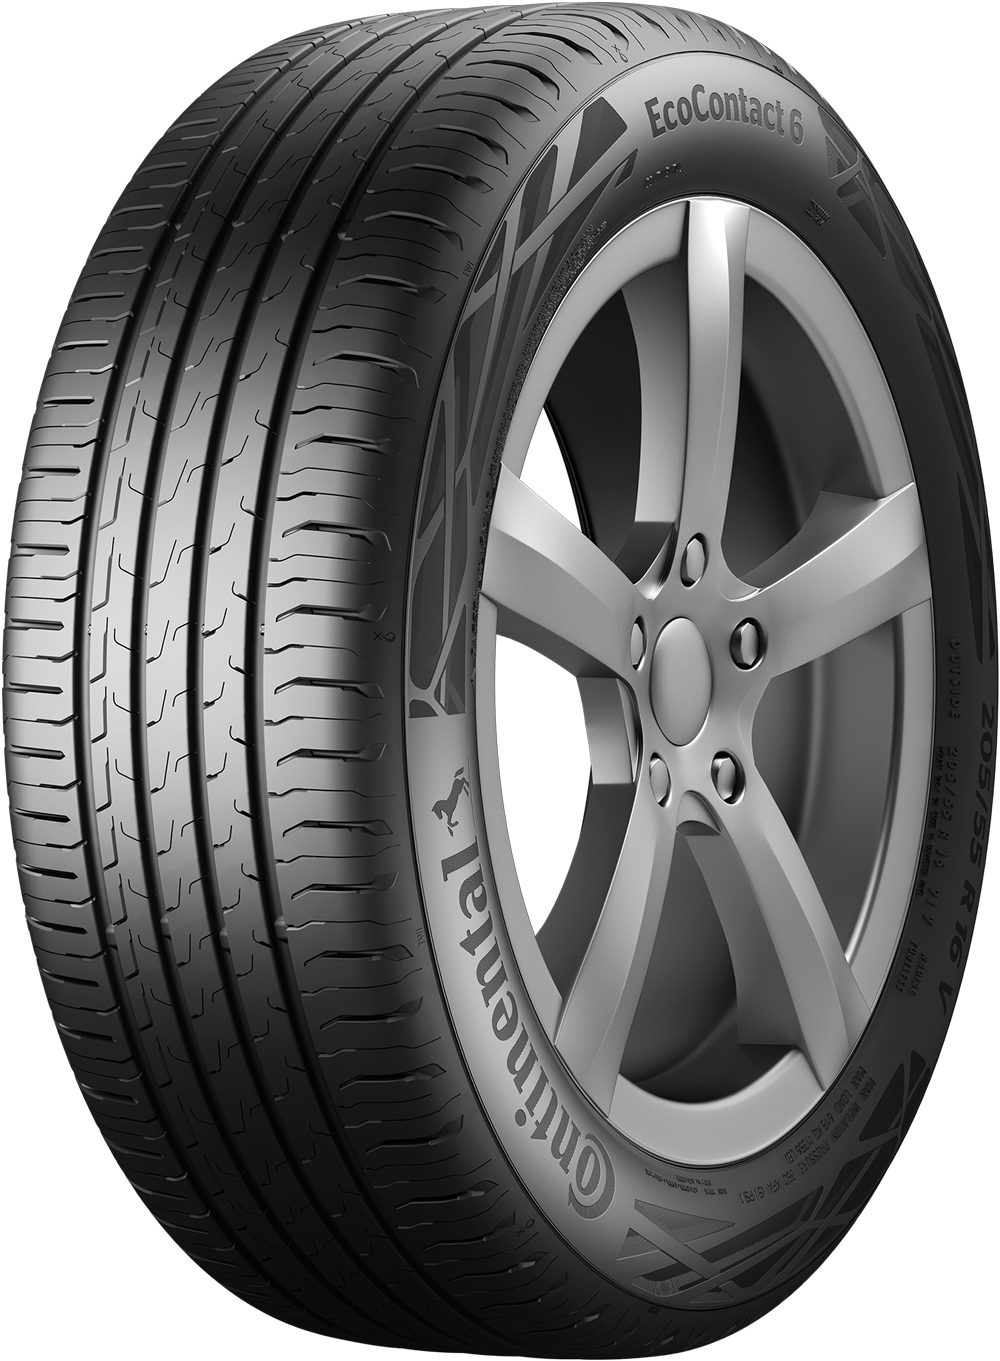 Anvelope auto CONTINENTAL ECO6XL XL 235/55 R18 104V